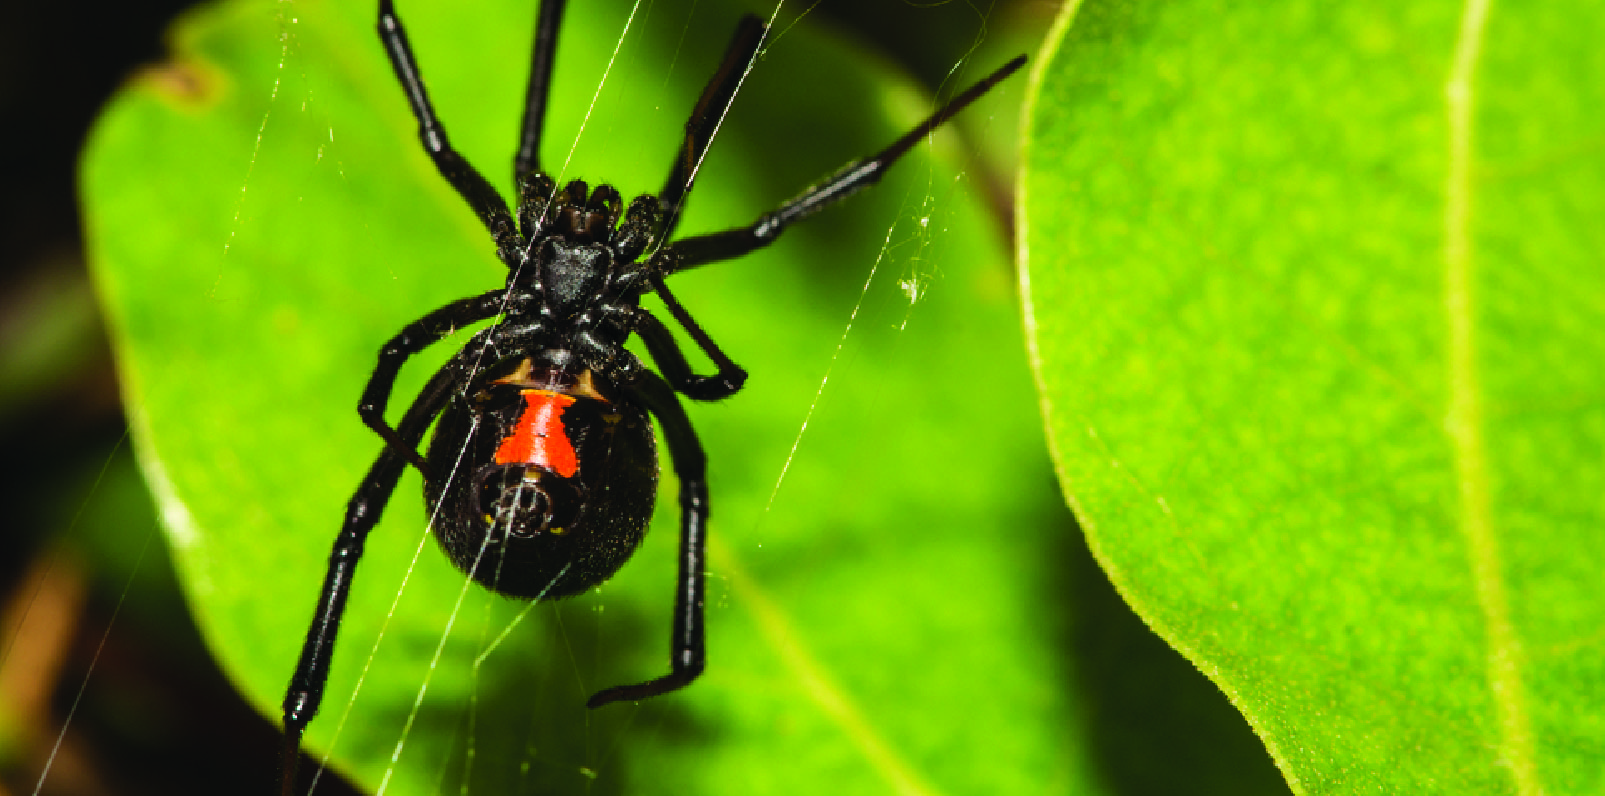 black widow spider hanging from silk threads in front of green leaves